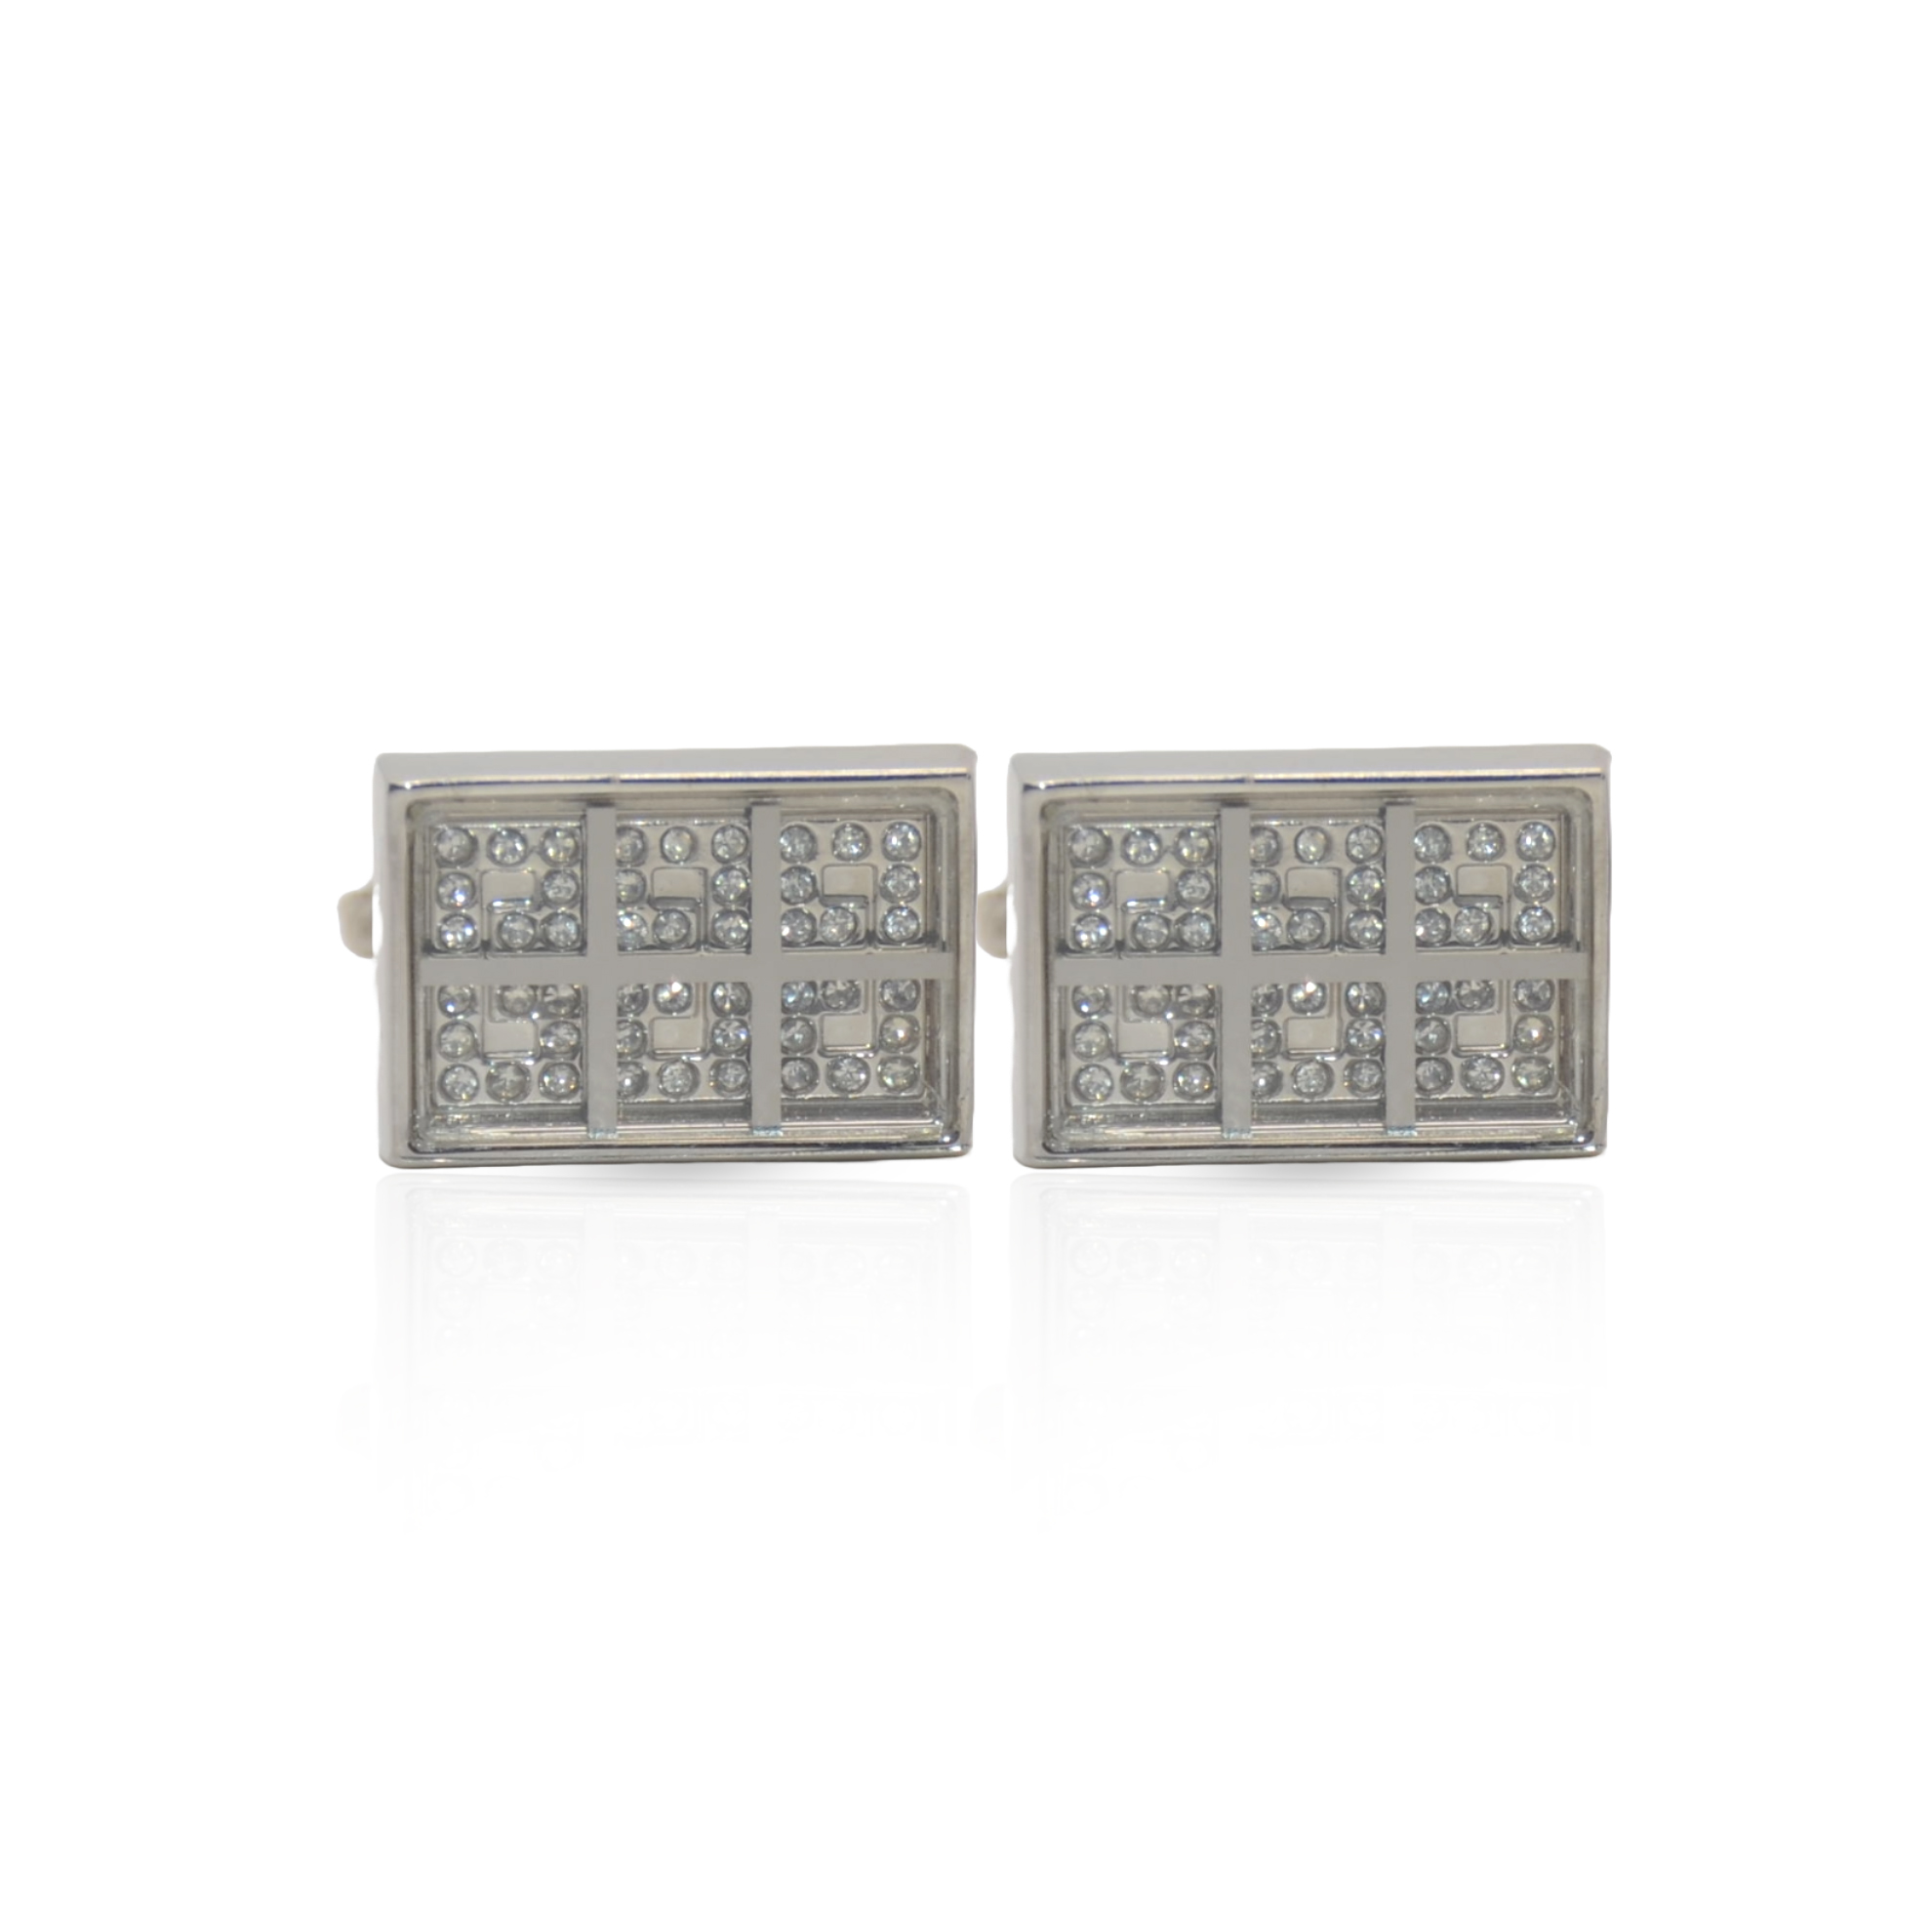 Cufflers Novelty Silver Rectangle Sparkling Crystal Cufflinks with Free Gift Box – CU-2029